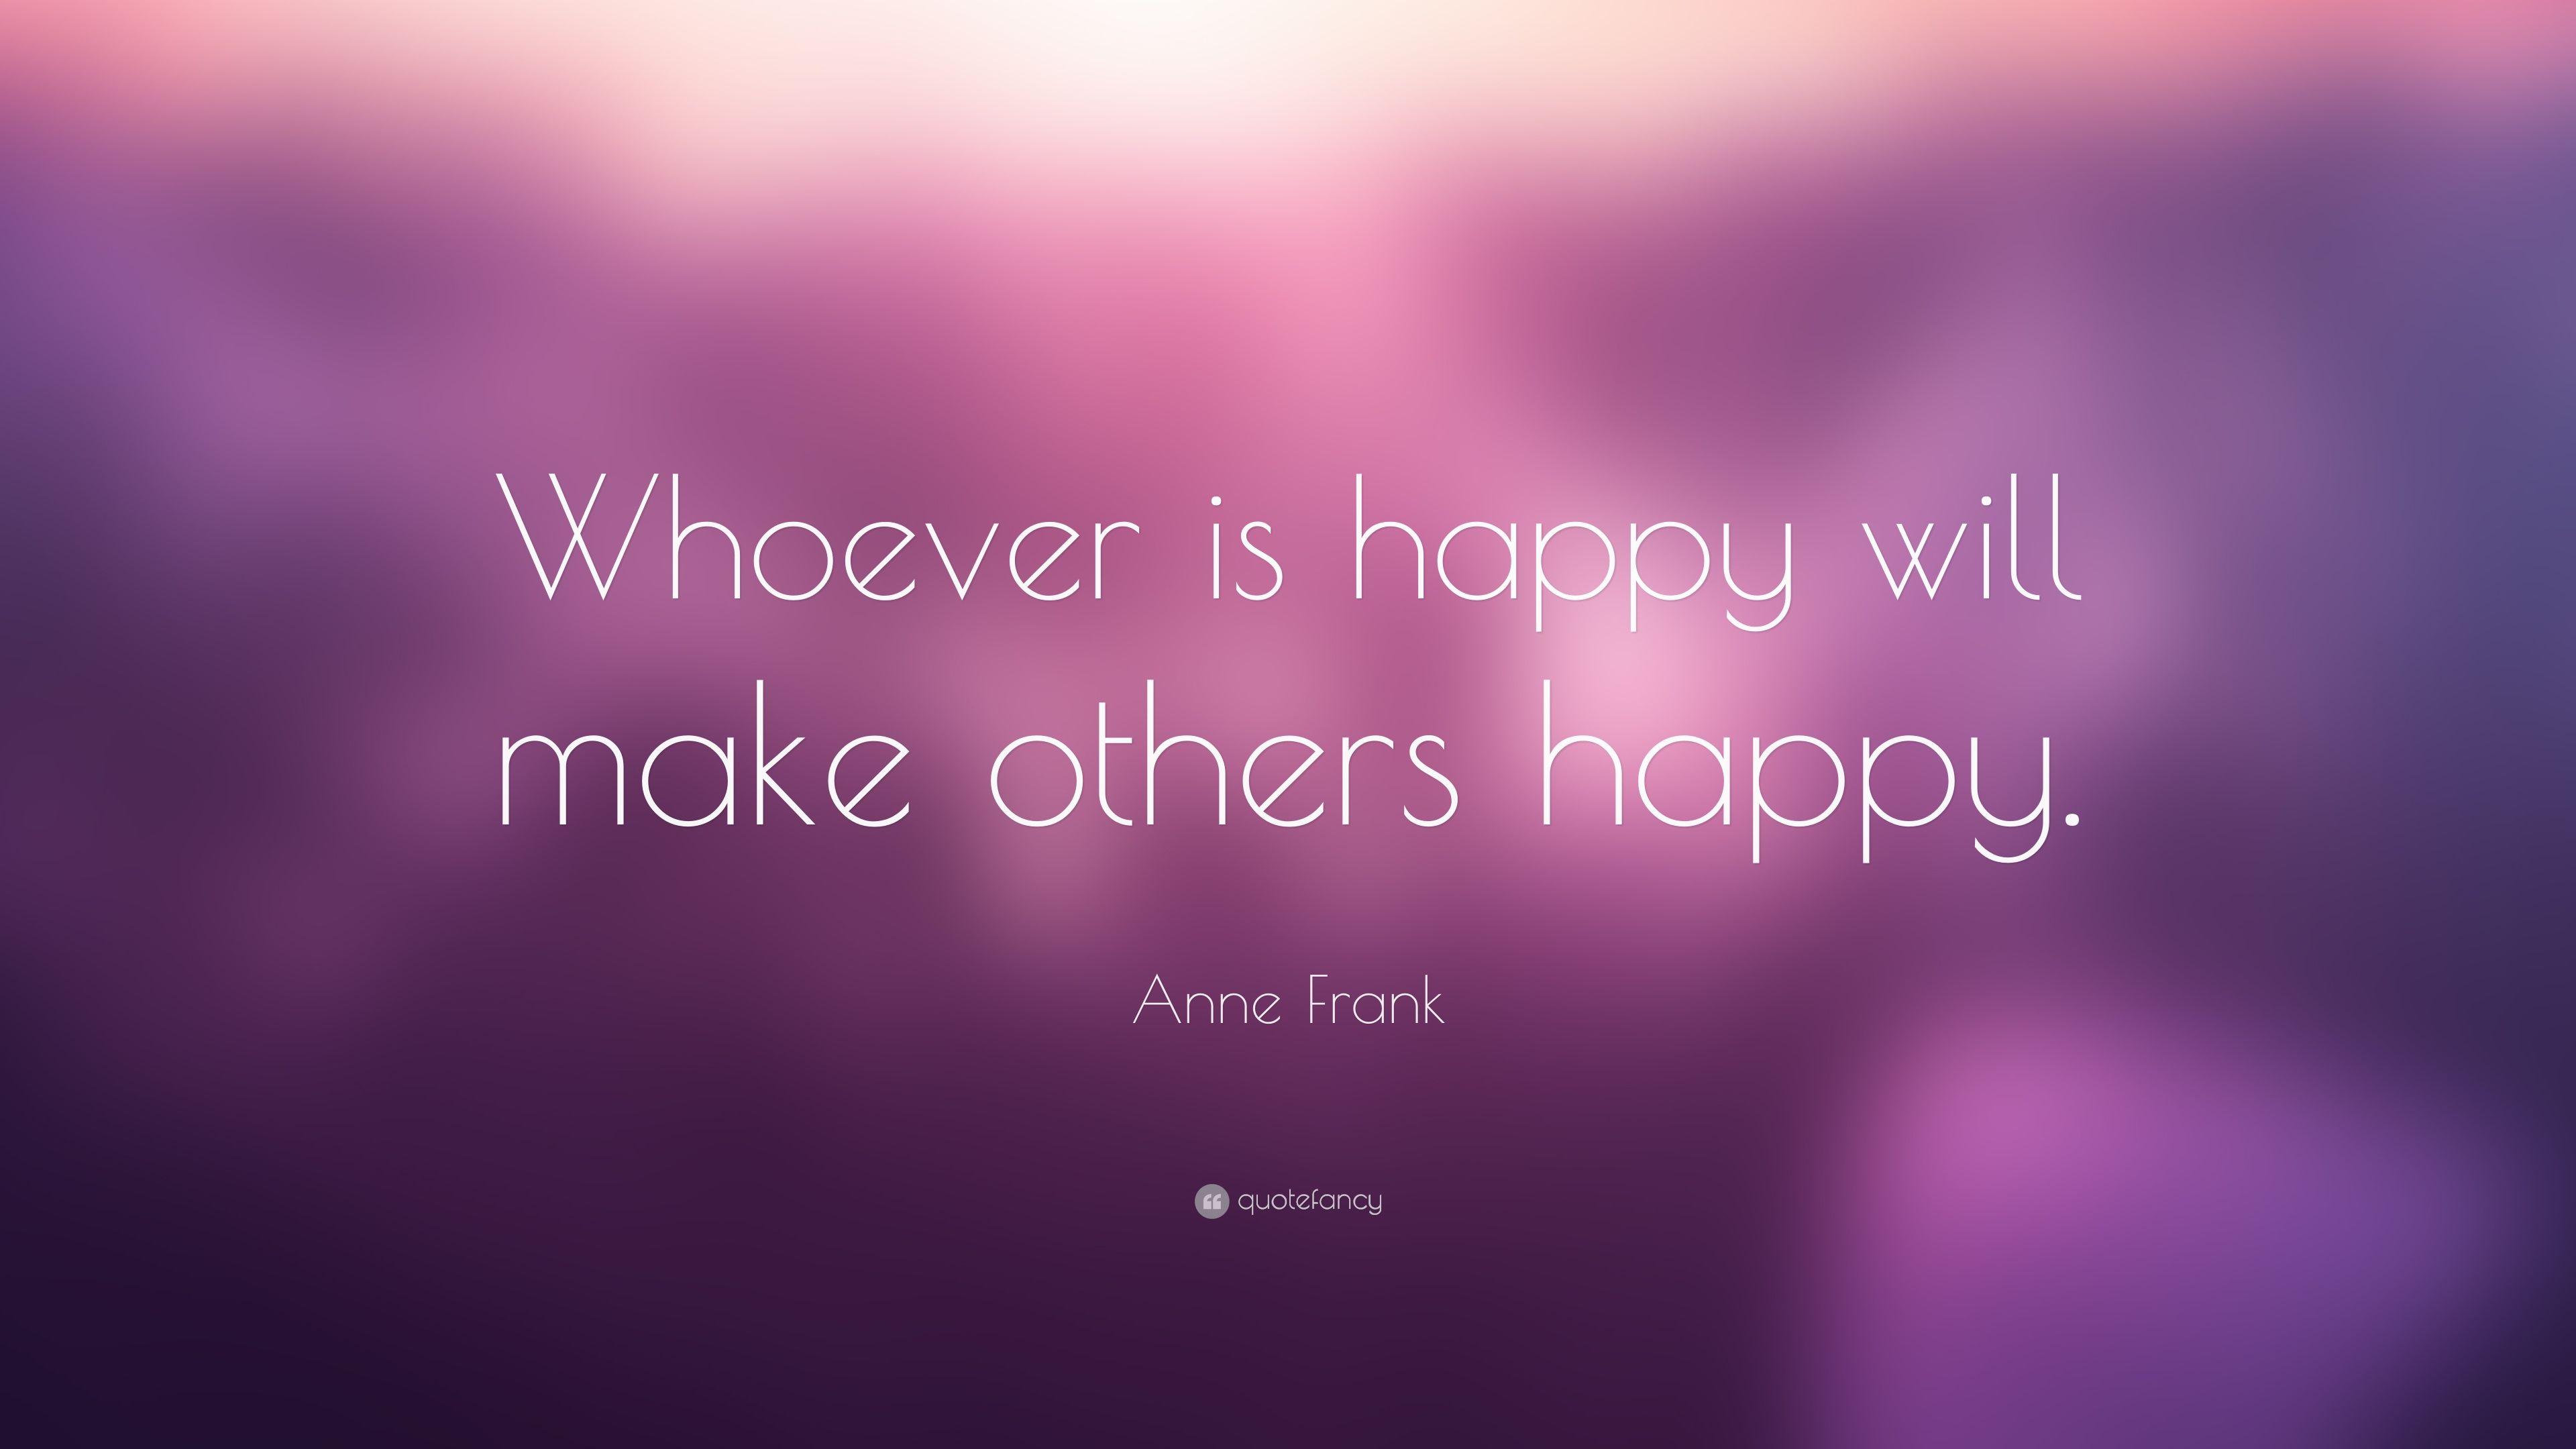 Anne Frank Quote: “Whoever is happy will make others happy.” 14